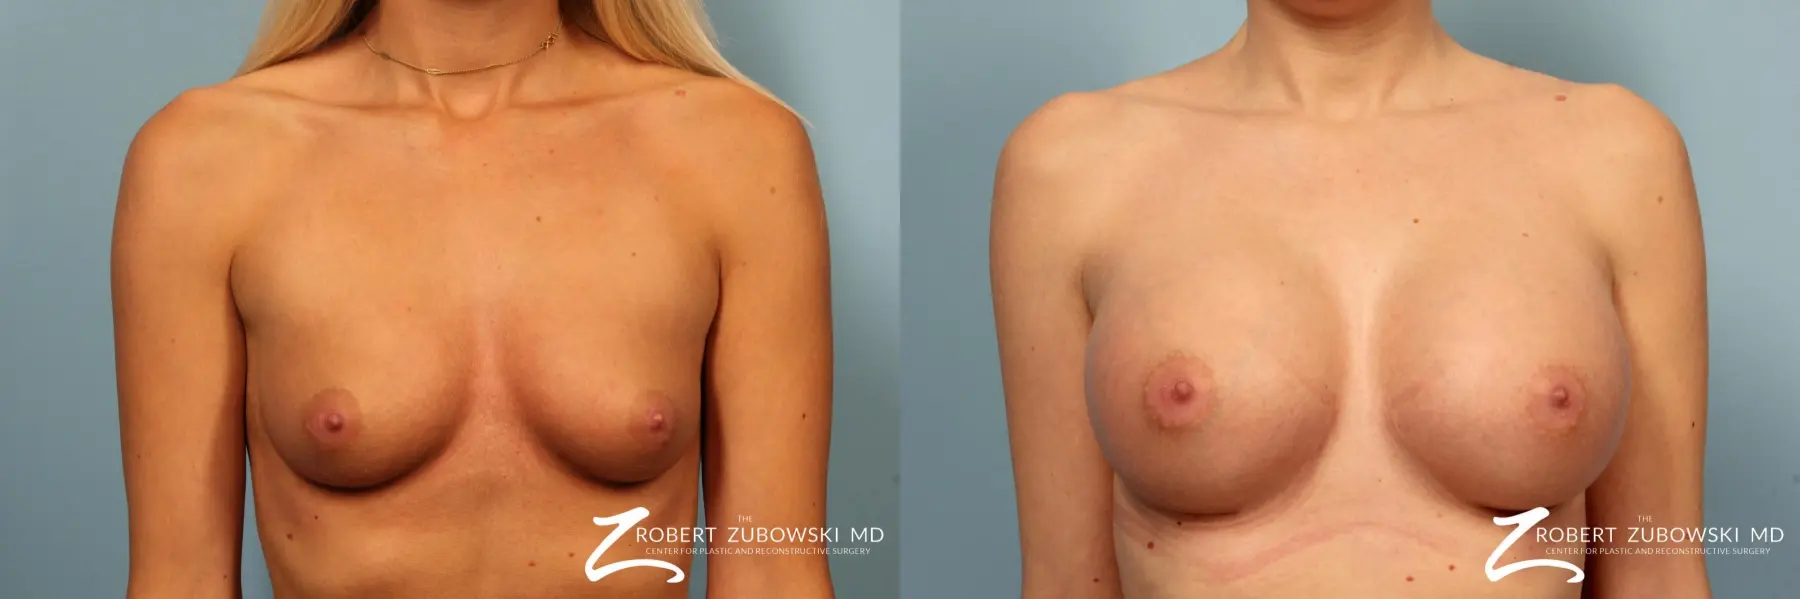 Breast Augmentation: Patient 9 - Before and After 1